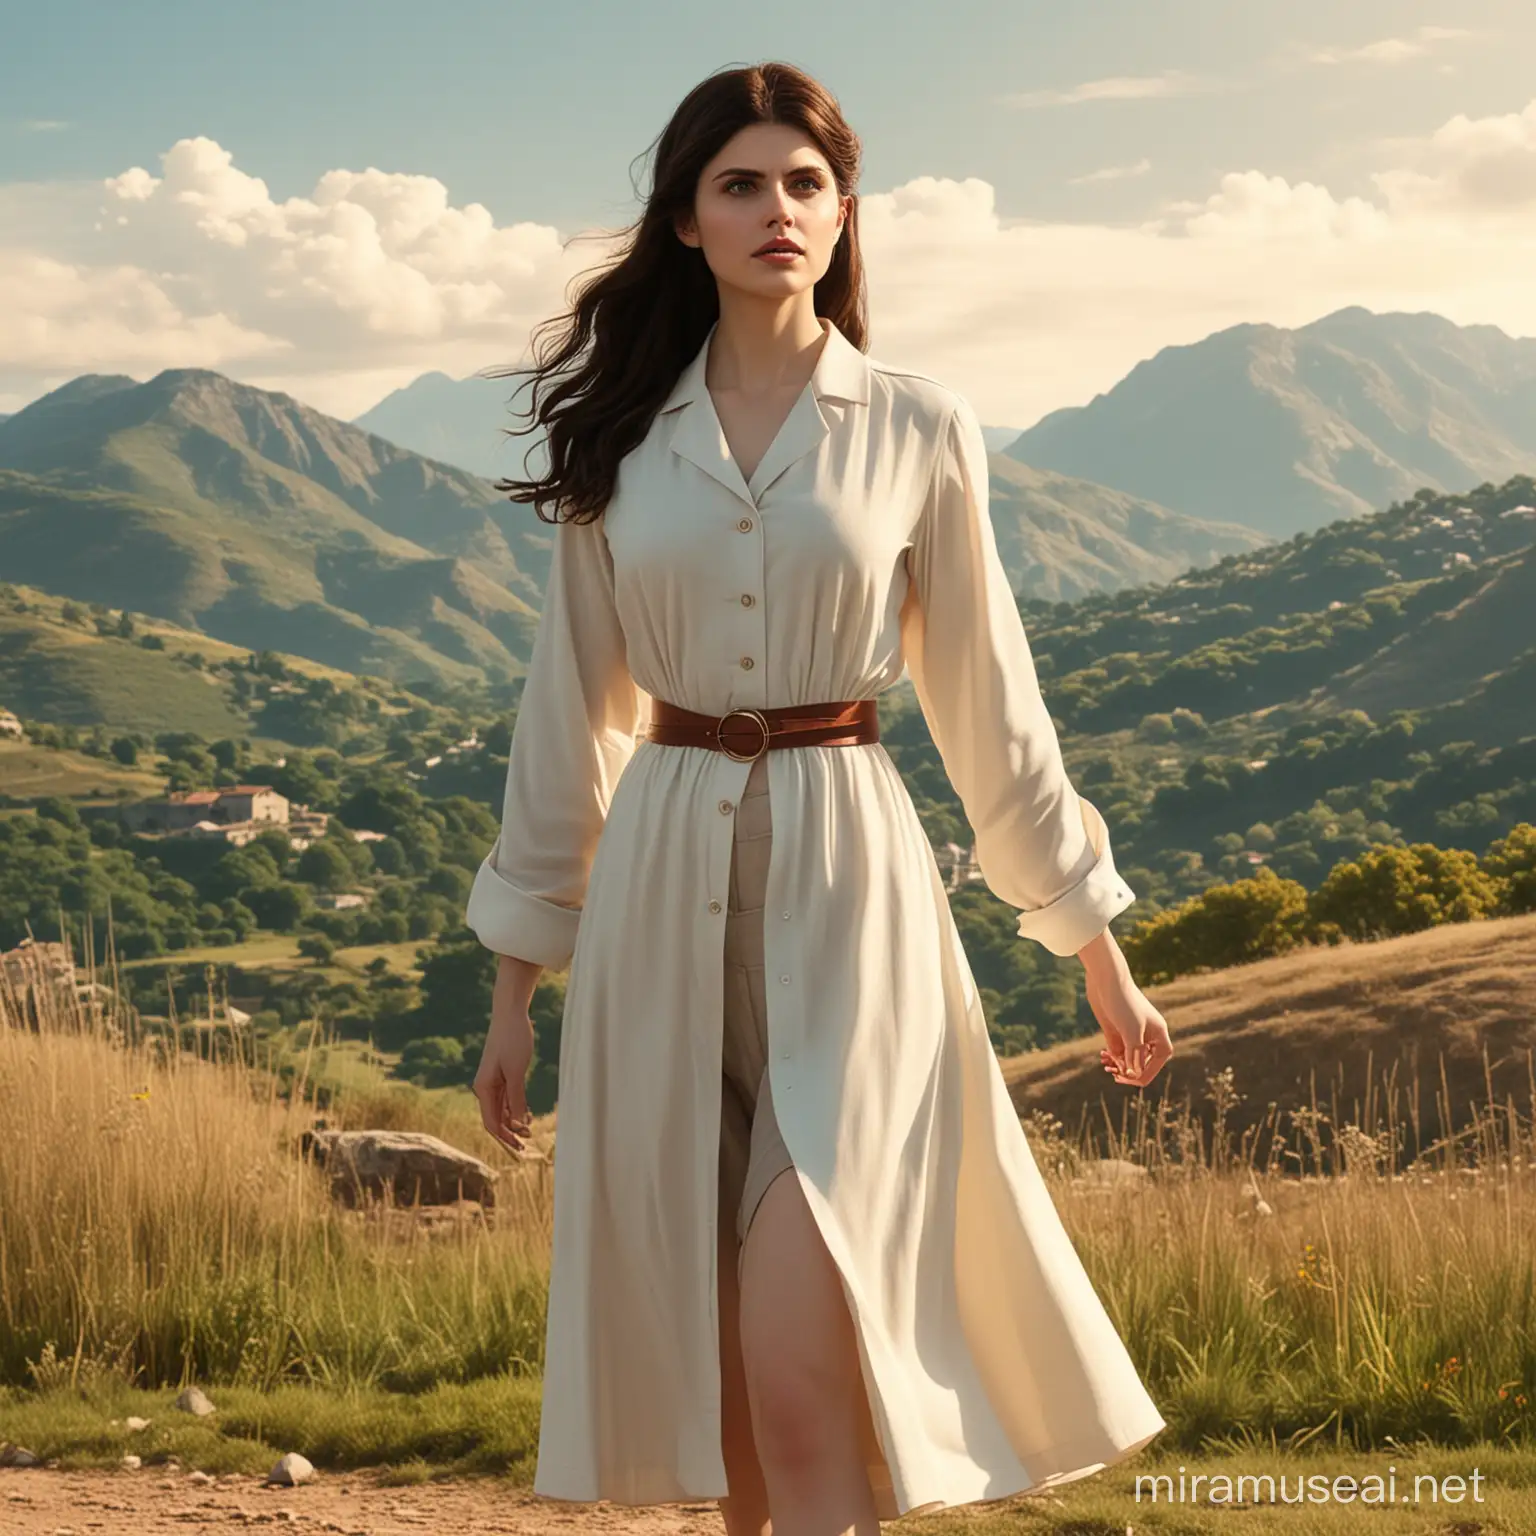 Alexandra Daddario as Lilian Wienberg in FullLength Dr Stone Anime Outfit